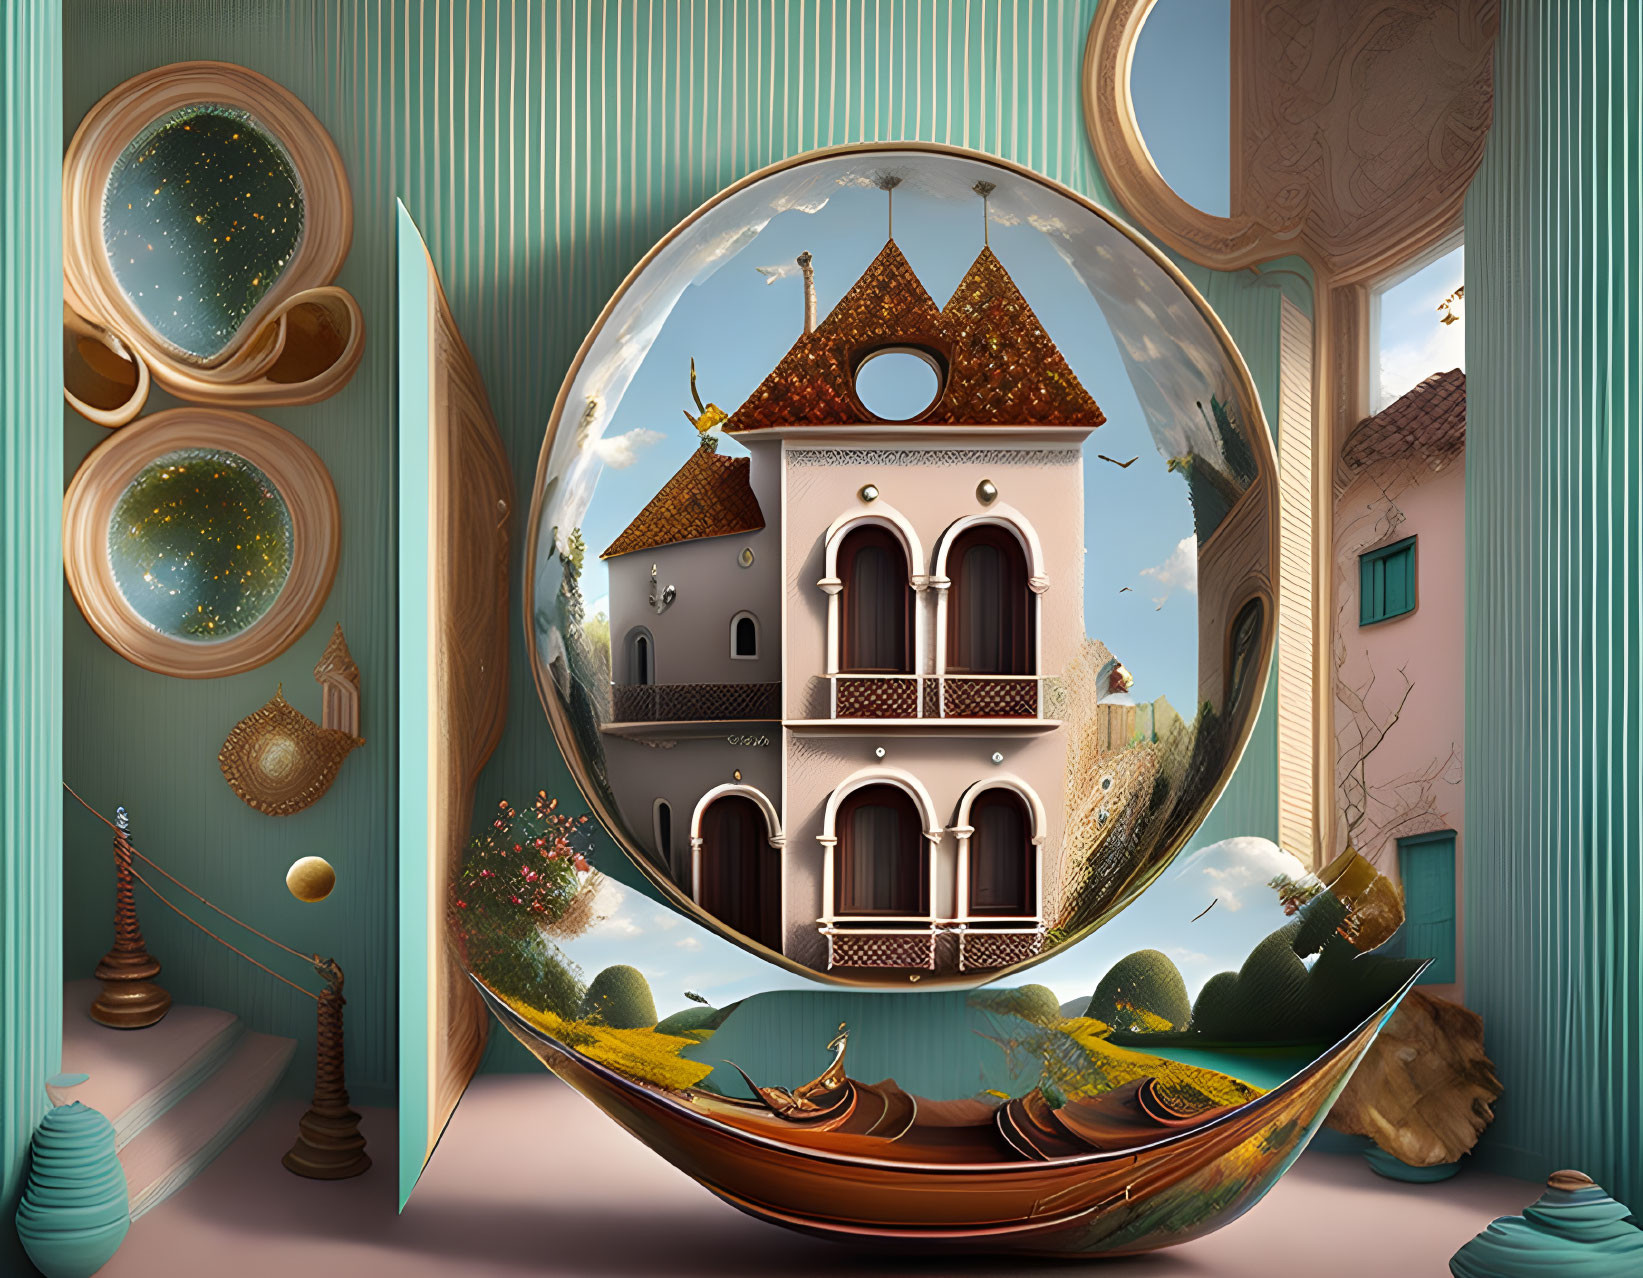 Surreal image of glass-like vessel with traditional house, boat, and celestial backdrop